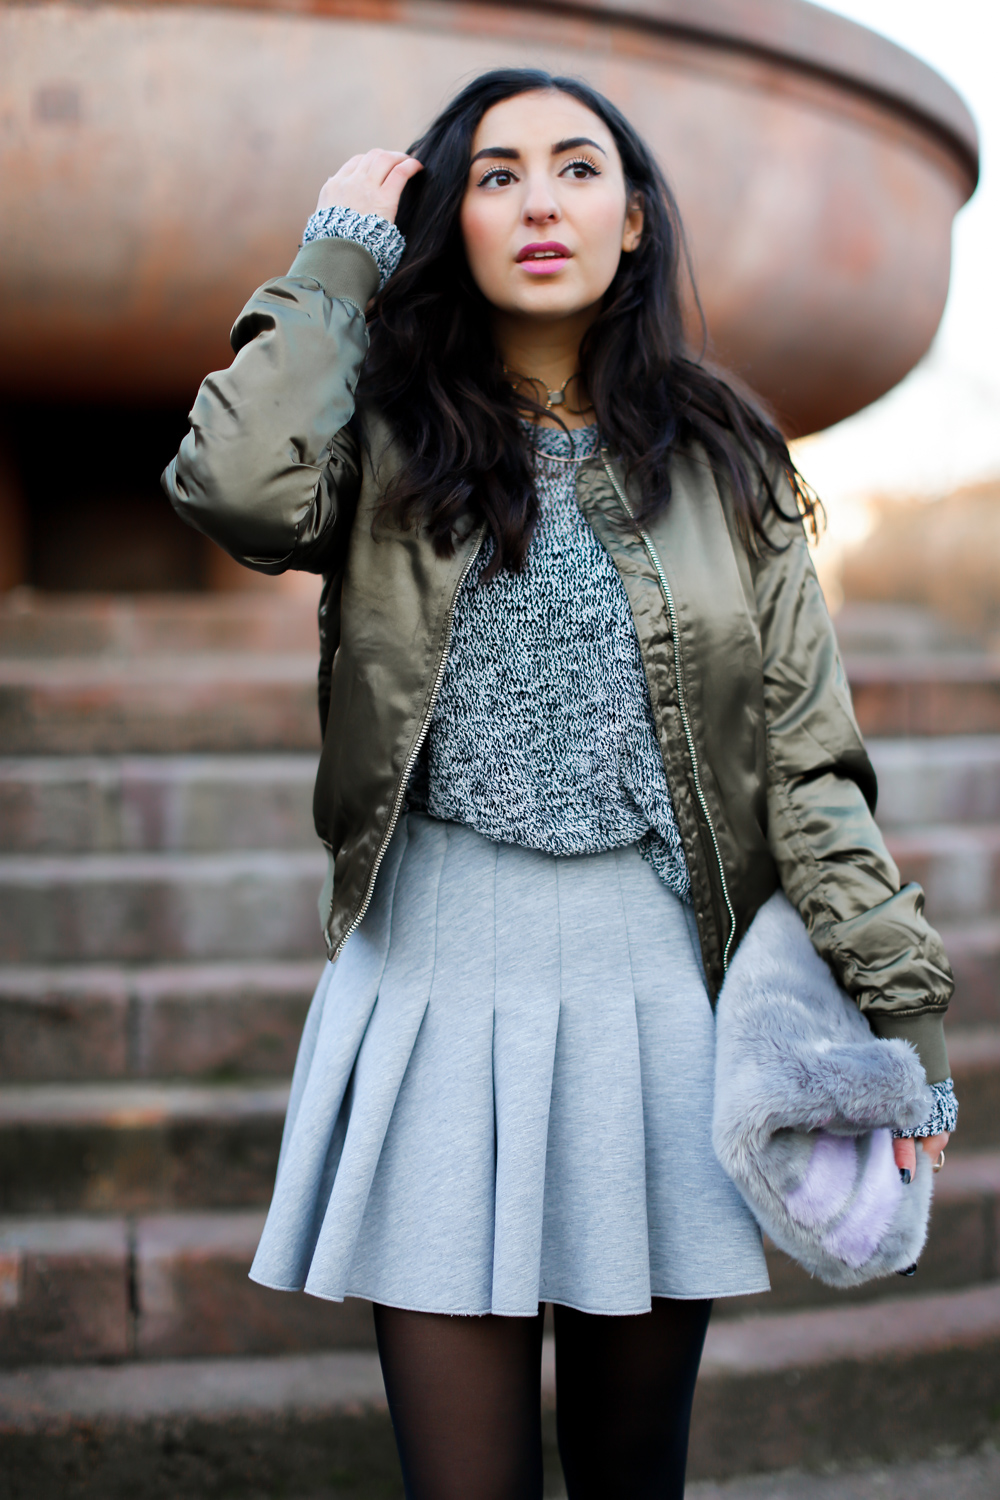 topshop olive bomber jacket skater skirt H&M preppy look peperosa black booties fluffy bag grey khaki streetstyle casual winterlook winter outfit samieze fashionblog blogger berlin deutschland sif jakobs ring necklace jewelry ivyrevel choker